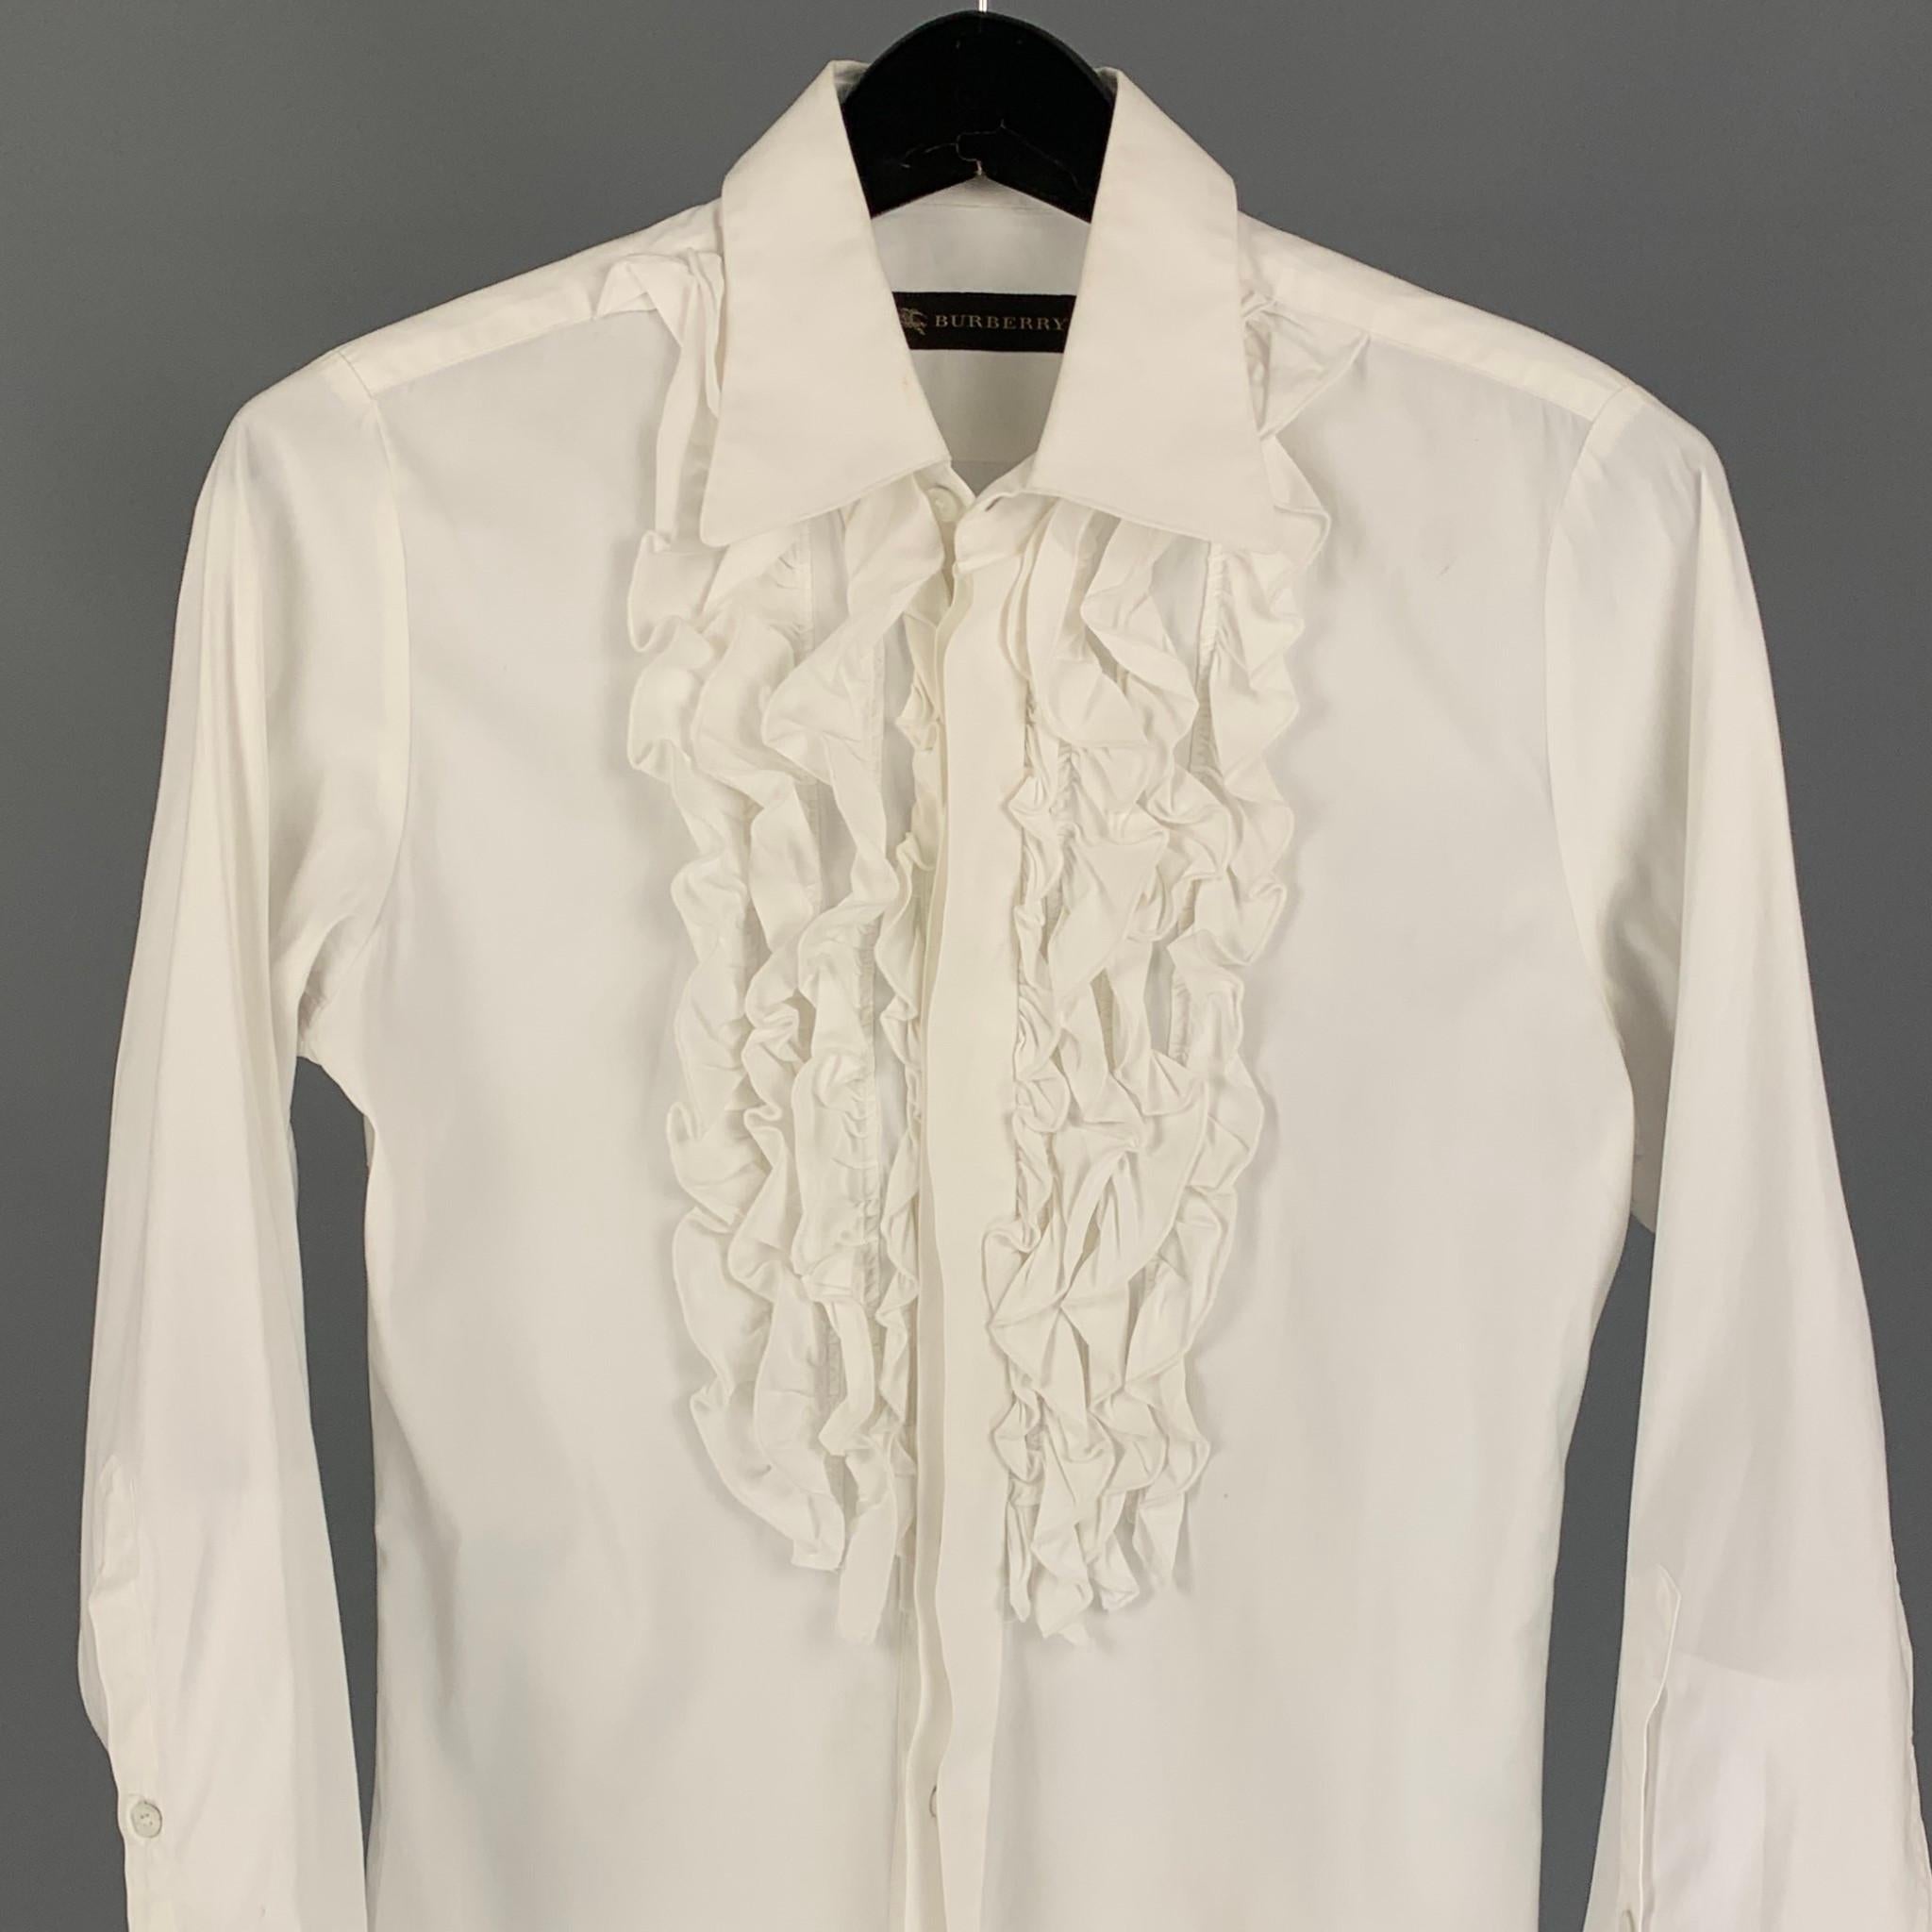 BURBERRY PRORSUM  tuxedo long sleeve shirt comes in a white material with a front ruffle design featuring a pointed collar and a hidden placket closure. 

Good Pre-Owned Condition. Minor stain at back. Fabric tag removed.
Marked: